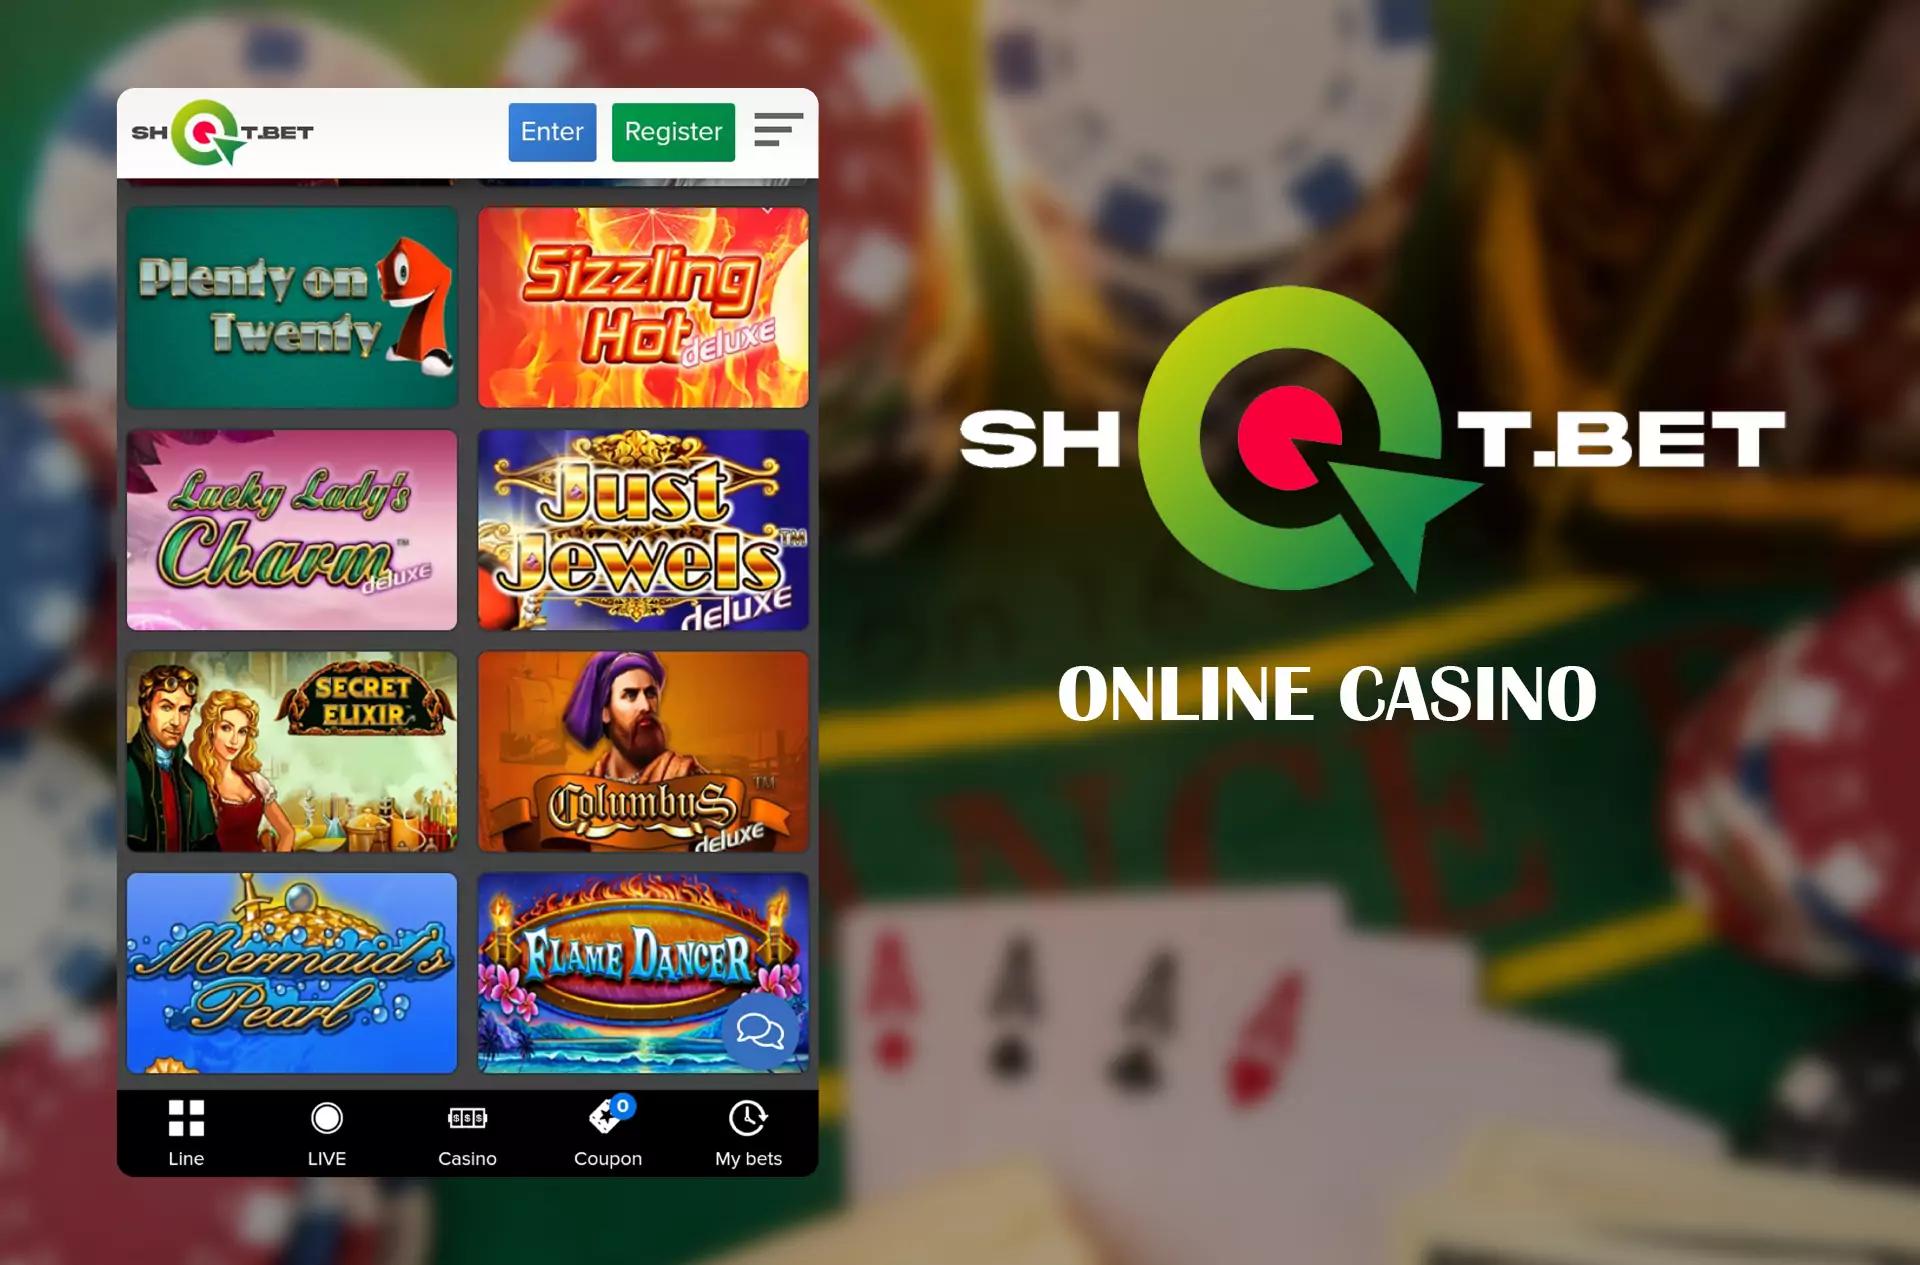 In the casino section, you can find slots and table games.